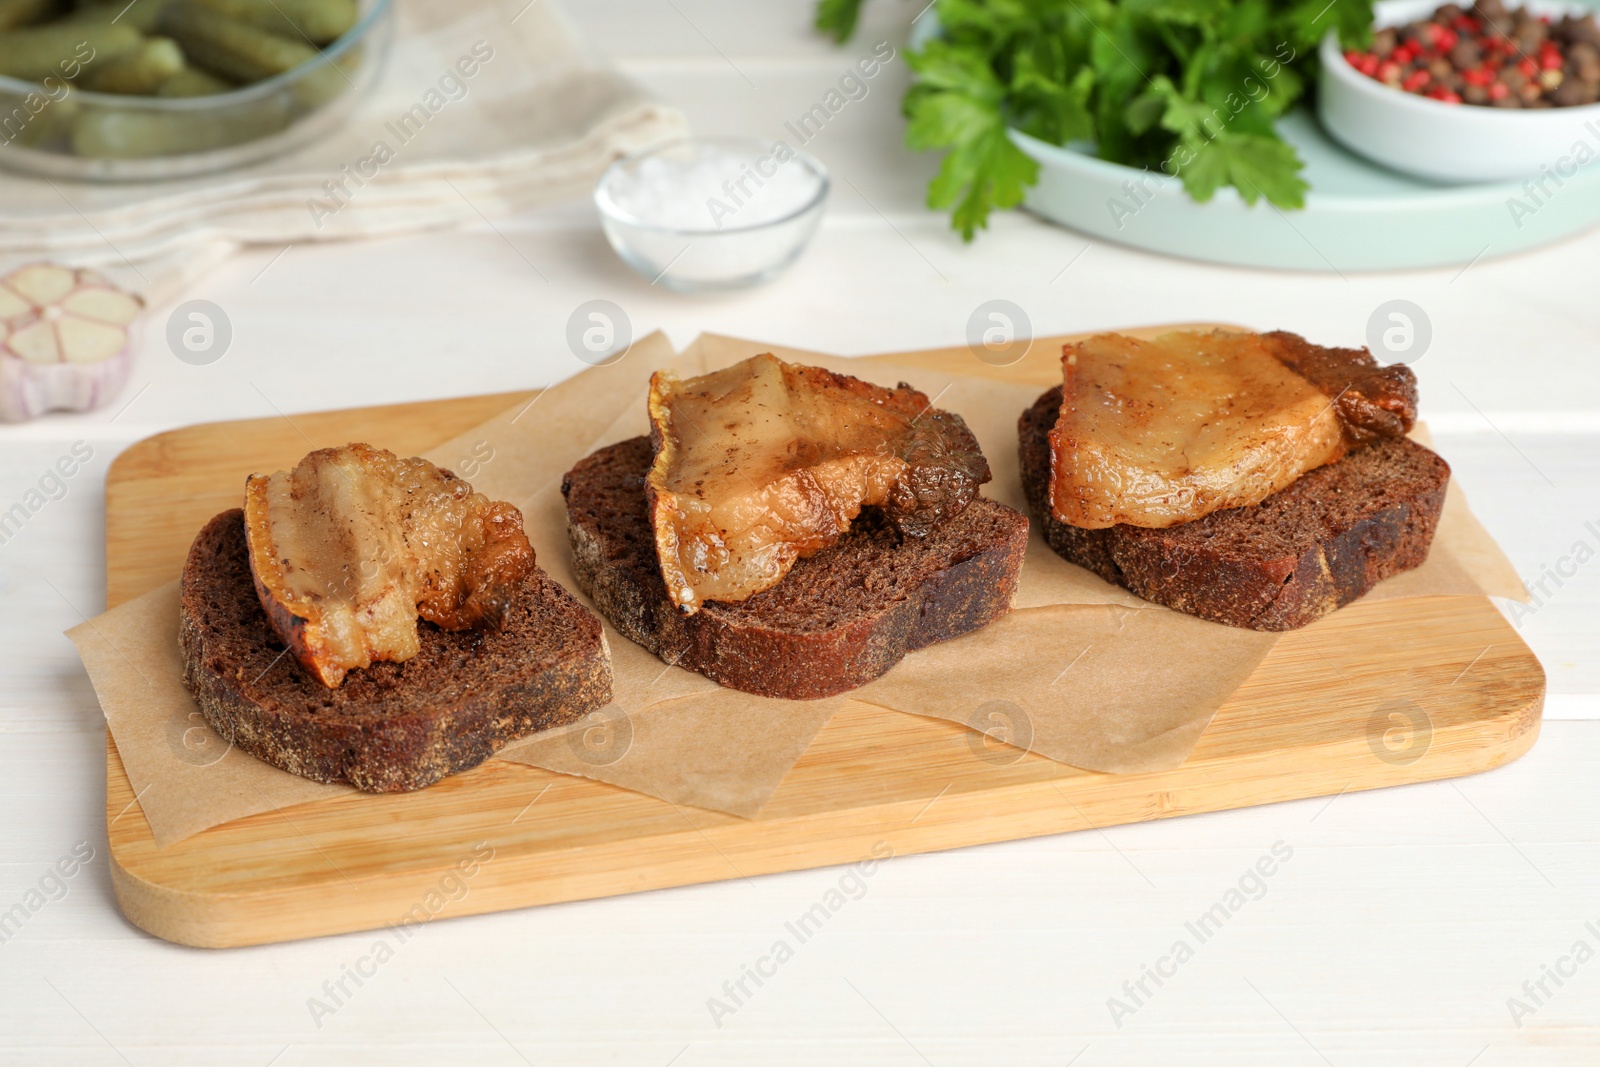 Photo of Rye bread with tasty fried cracklings on white wooden table. Cooked pork lard